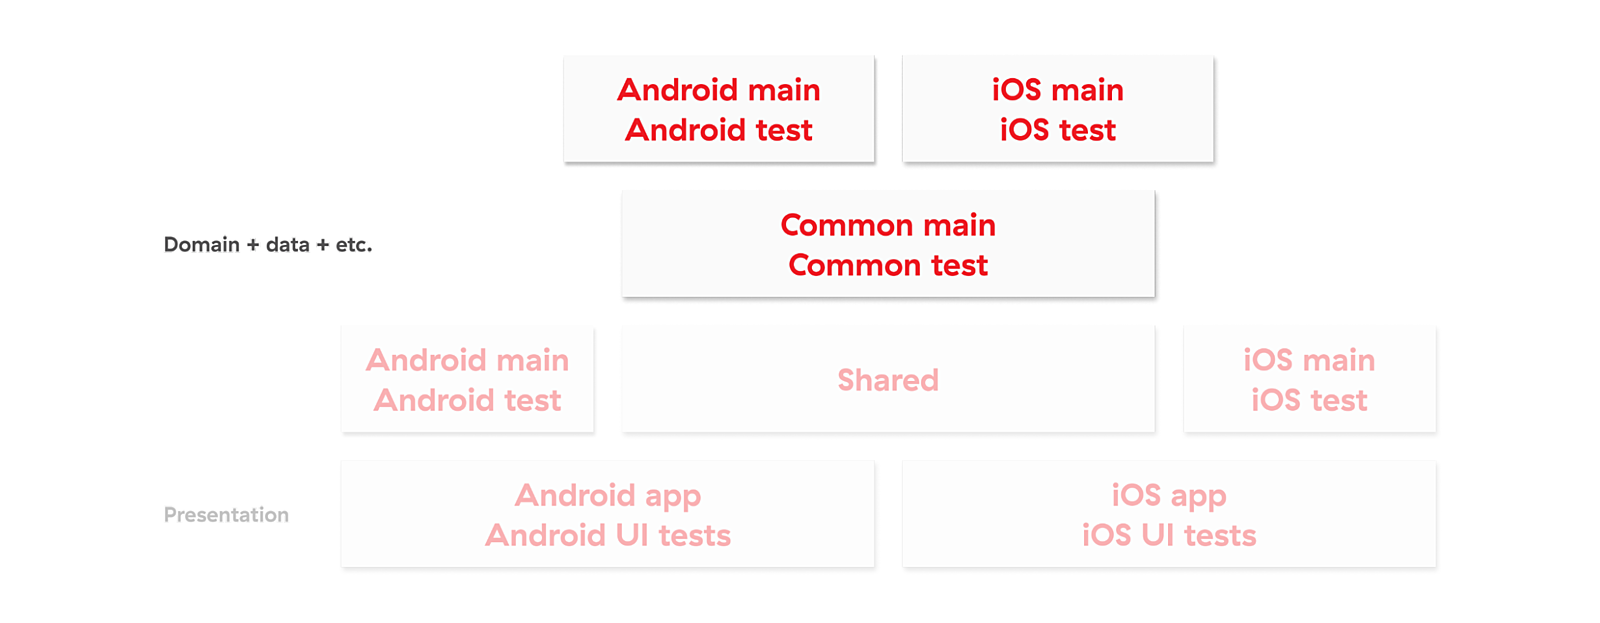 Testing packages in KMM app structure